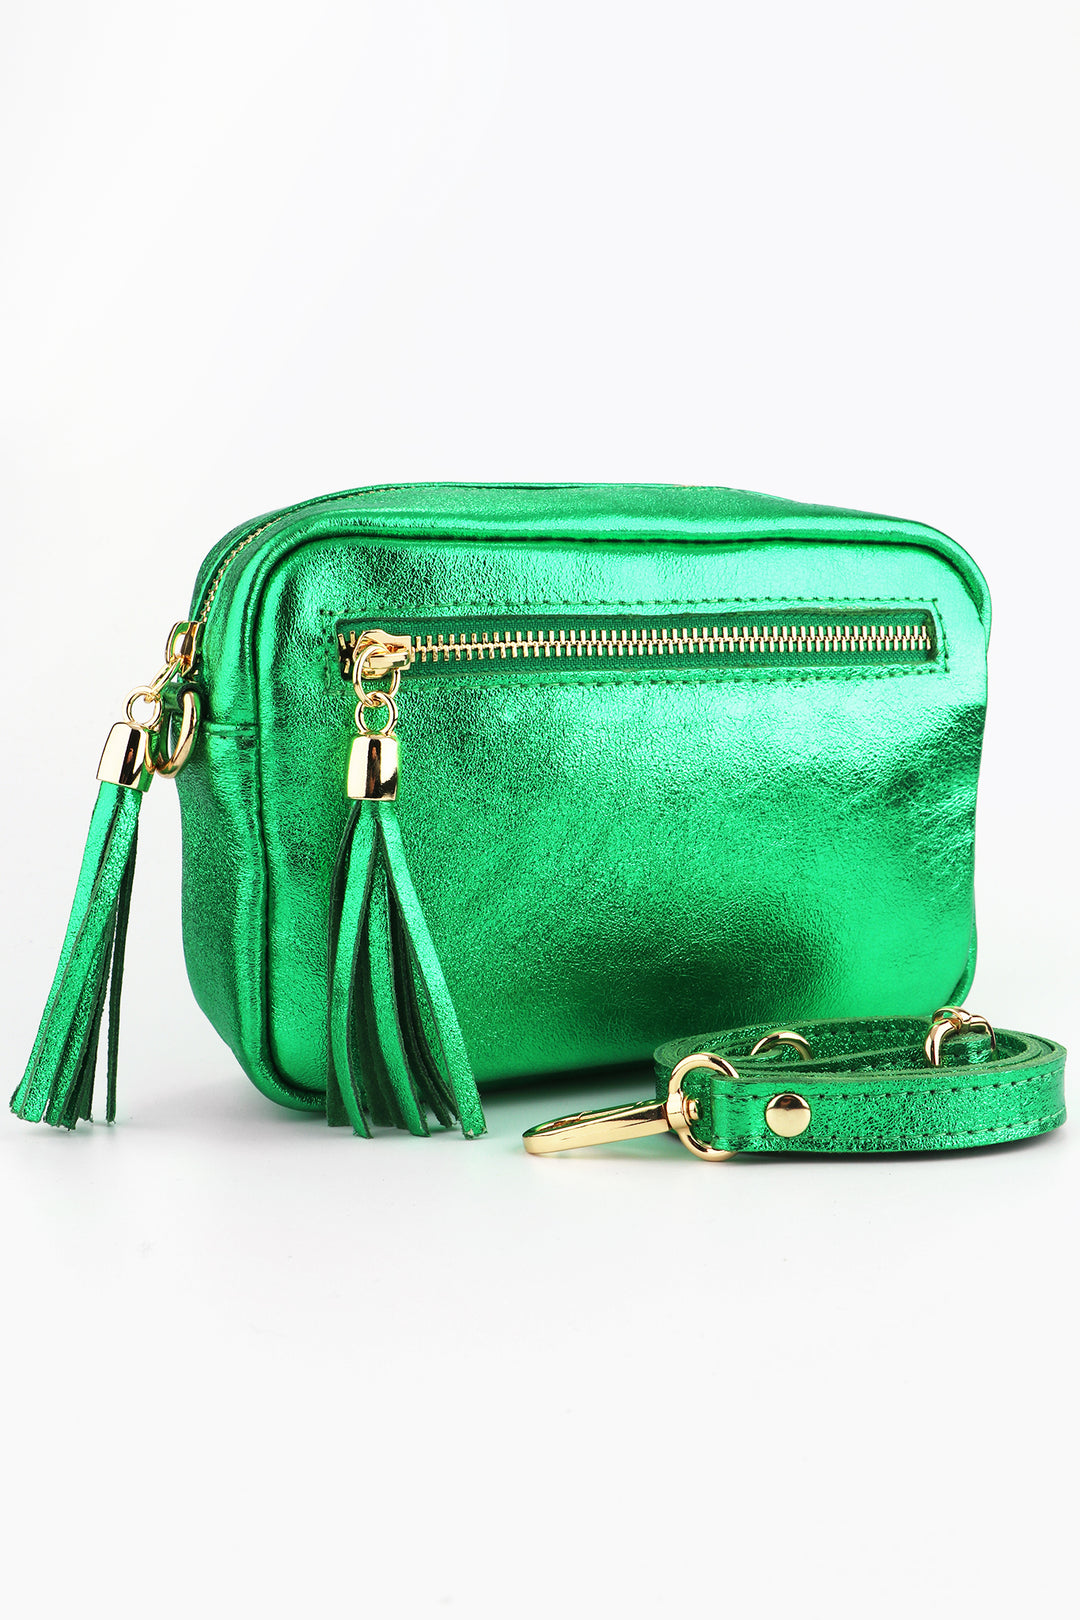 metallic green leather crossbody camera bag with two zip closing compartments, tassles and gold clip on hardware